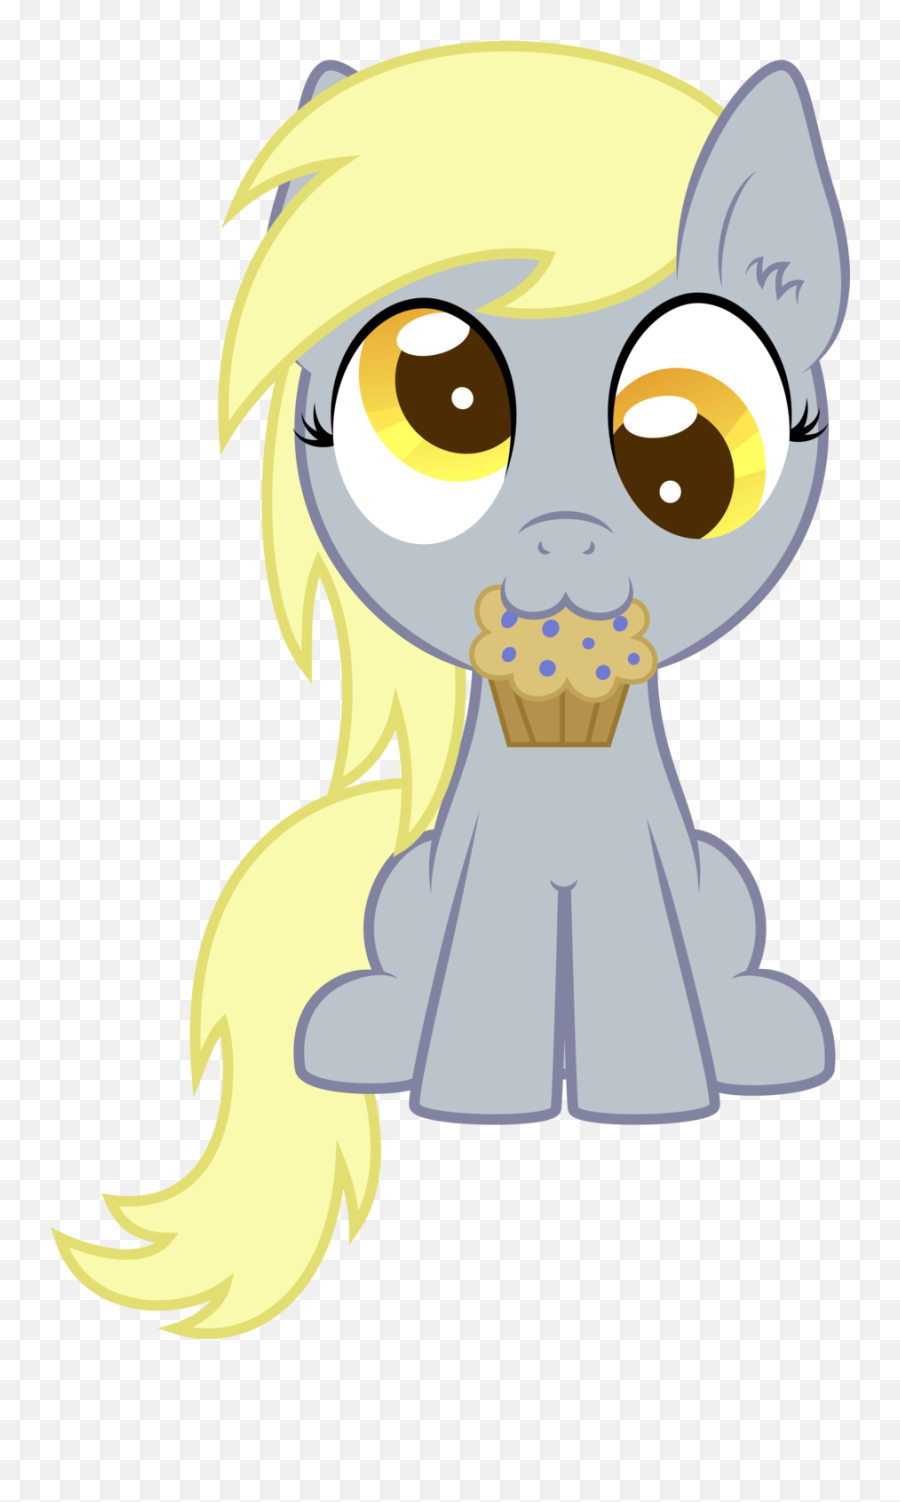 Derpy Muffins Or Ditzy Doo What Do You - Muffin From My Little Pony Emoji,Derpy Emoji